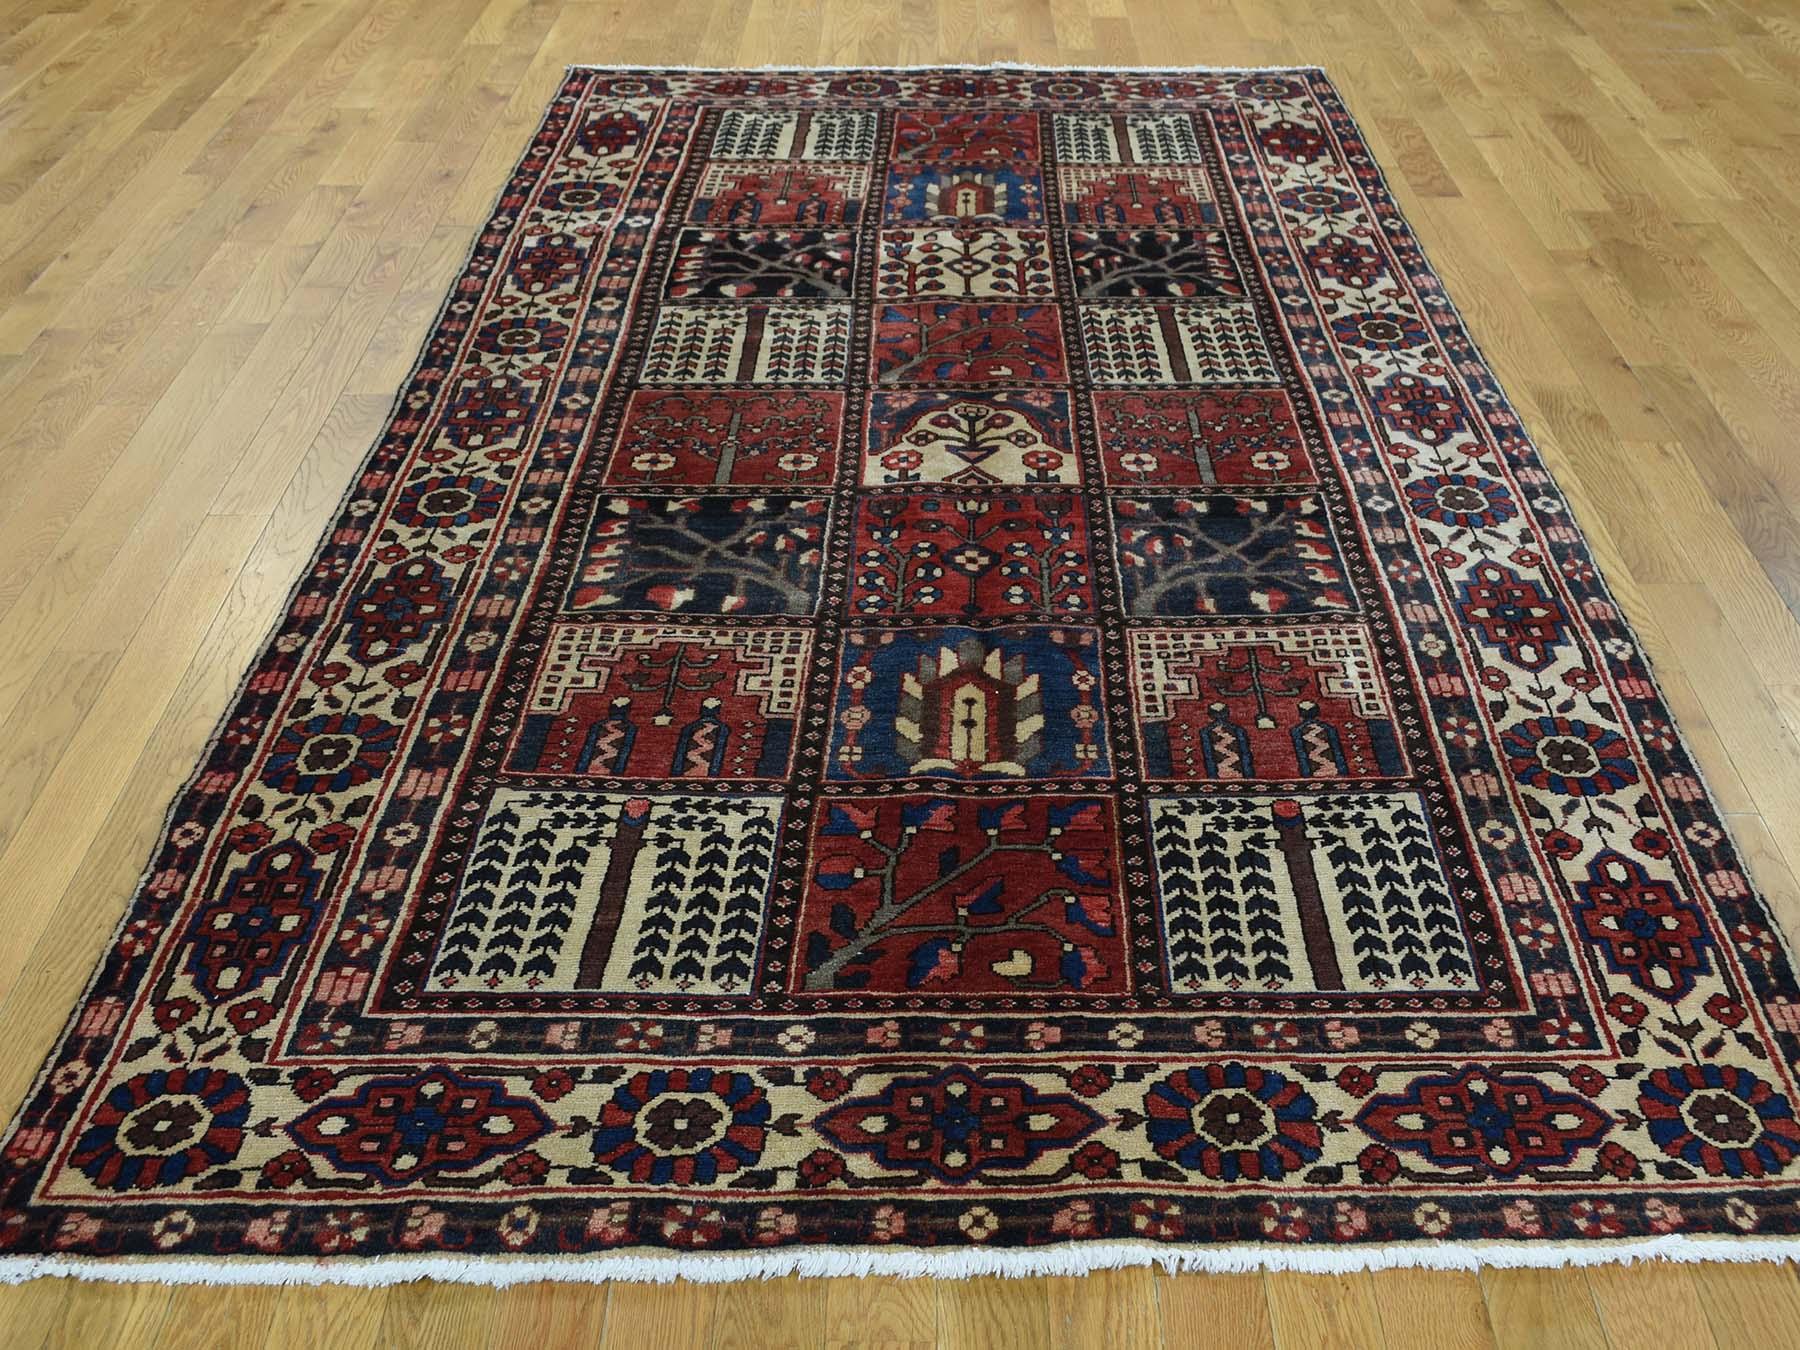 This fabulous hand knotted carpet has been created and designed for extra strength and durability. This rug has been handcrafted for weeks in the traditional method that is used to make rugs. This is truly a one-of-a-kind piece.

Exact rug size in